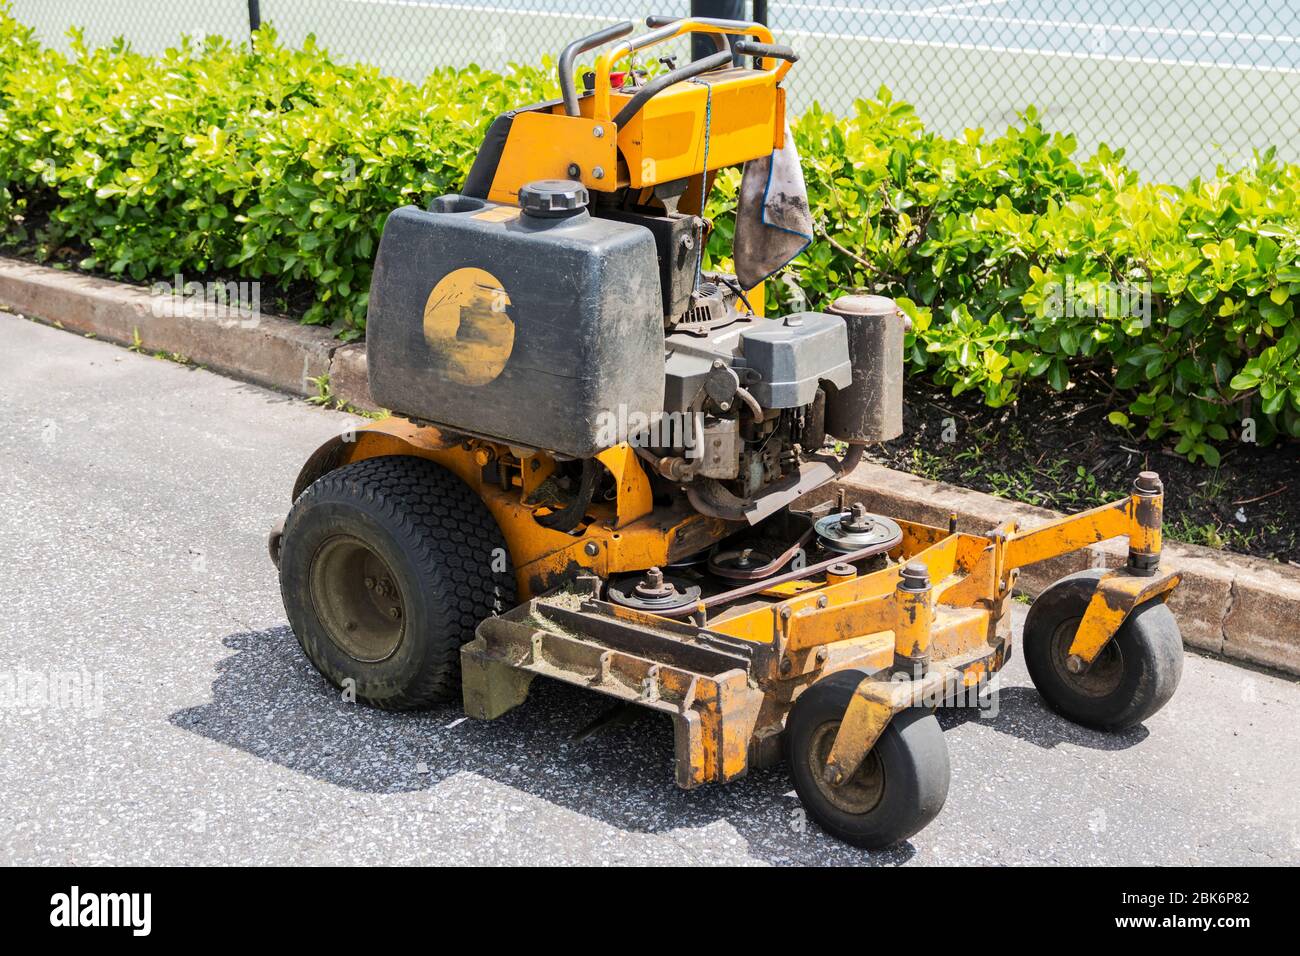 A yellow, professional landscaping lawnmower in a parking lot. Stock Photo